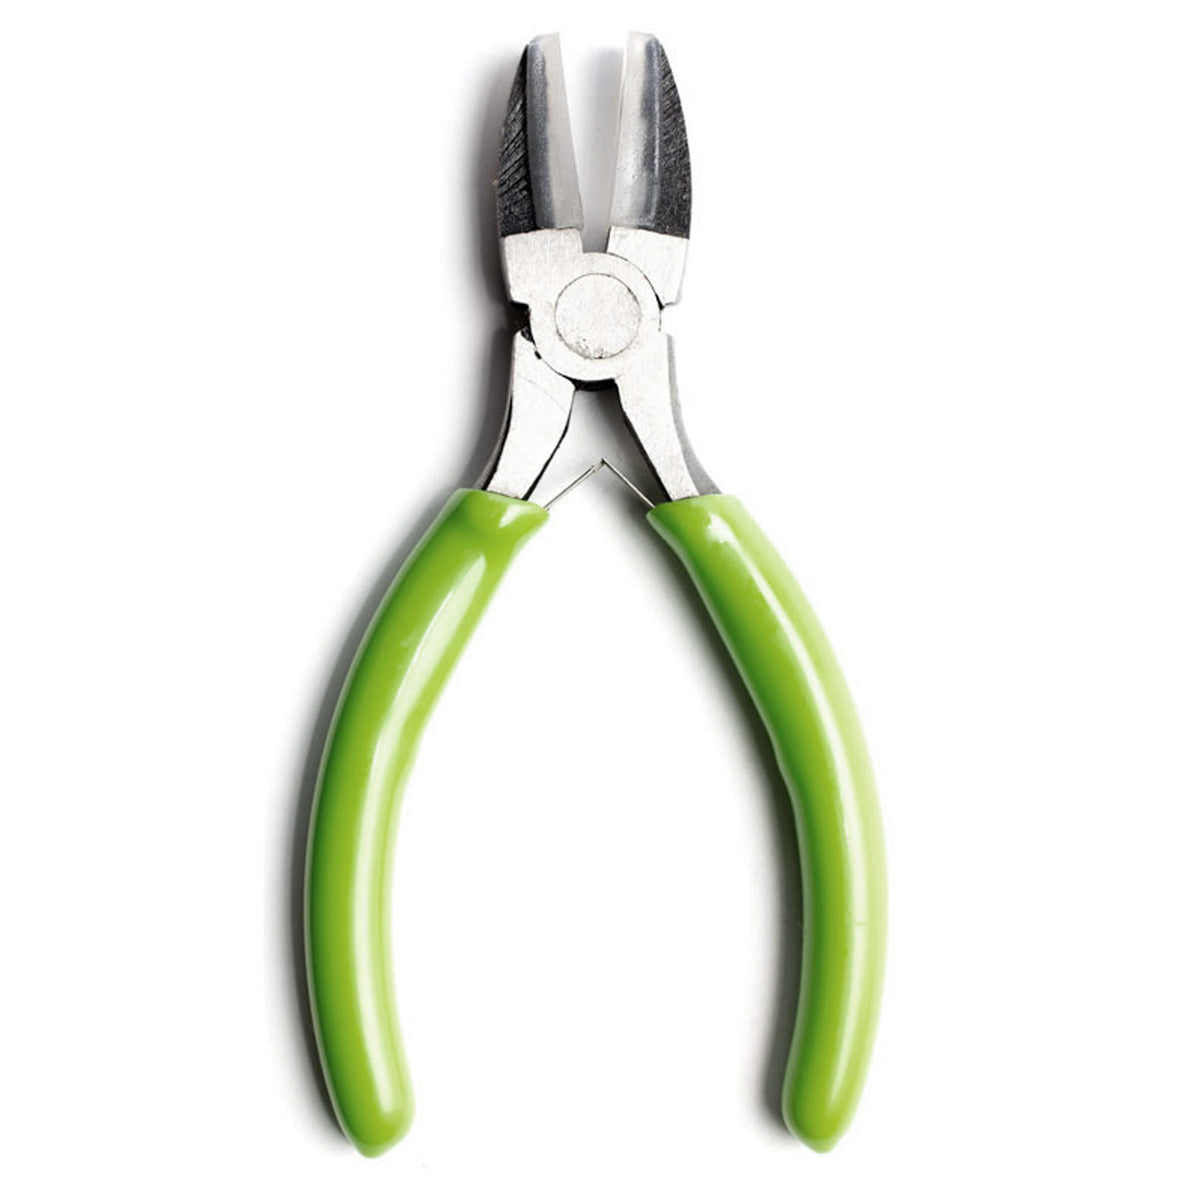 Nylon Jaw Flat/Round Nose Plier - Full Size Conventional Handle